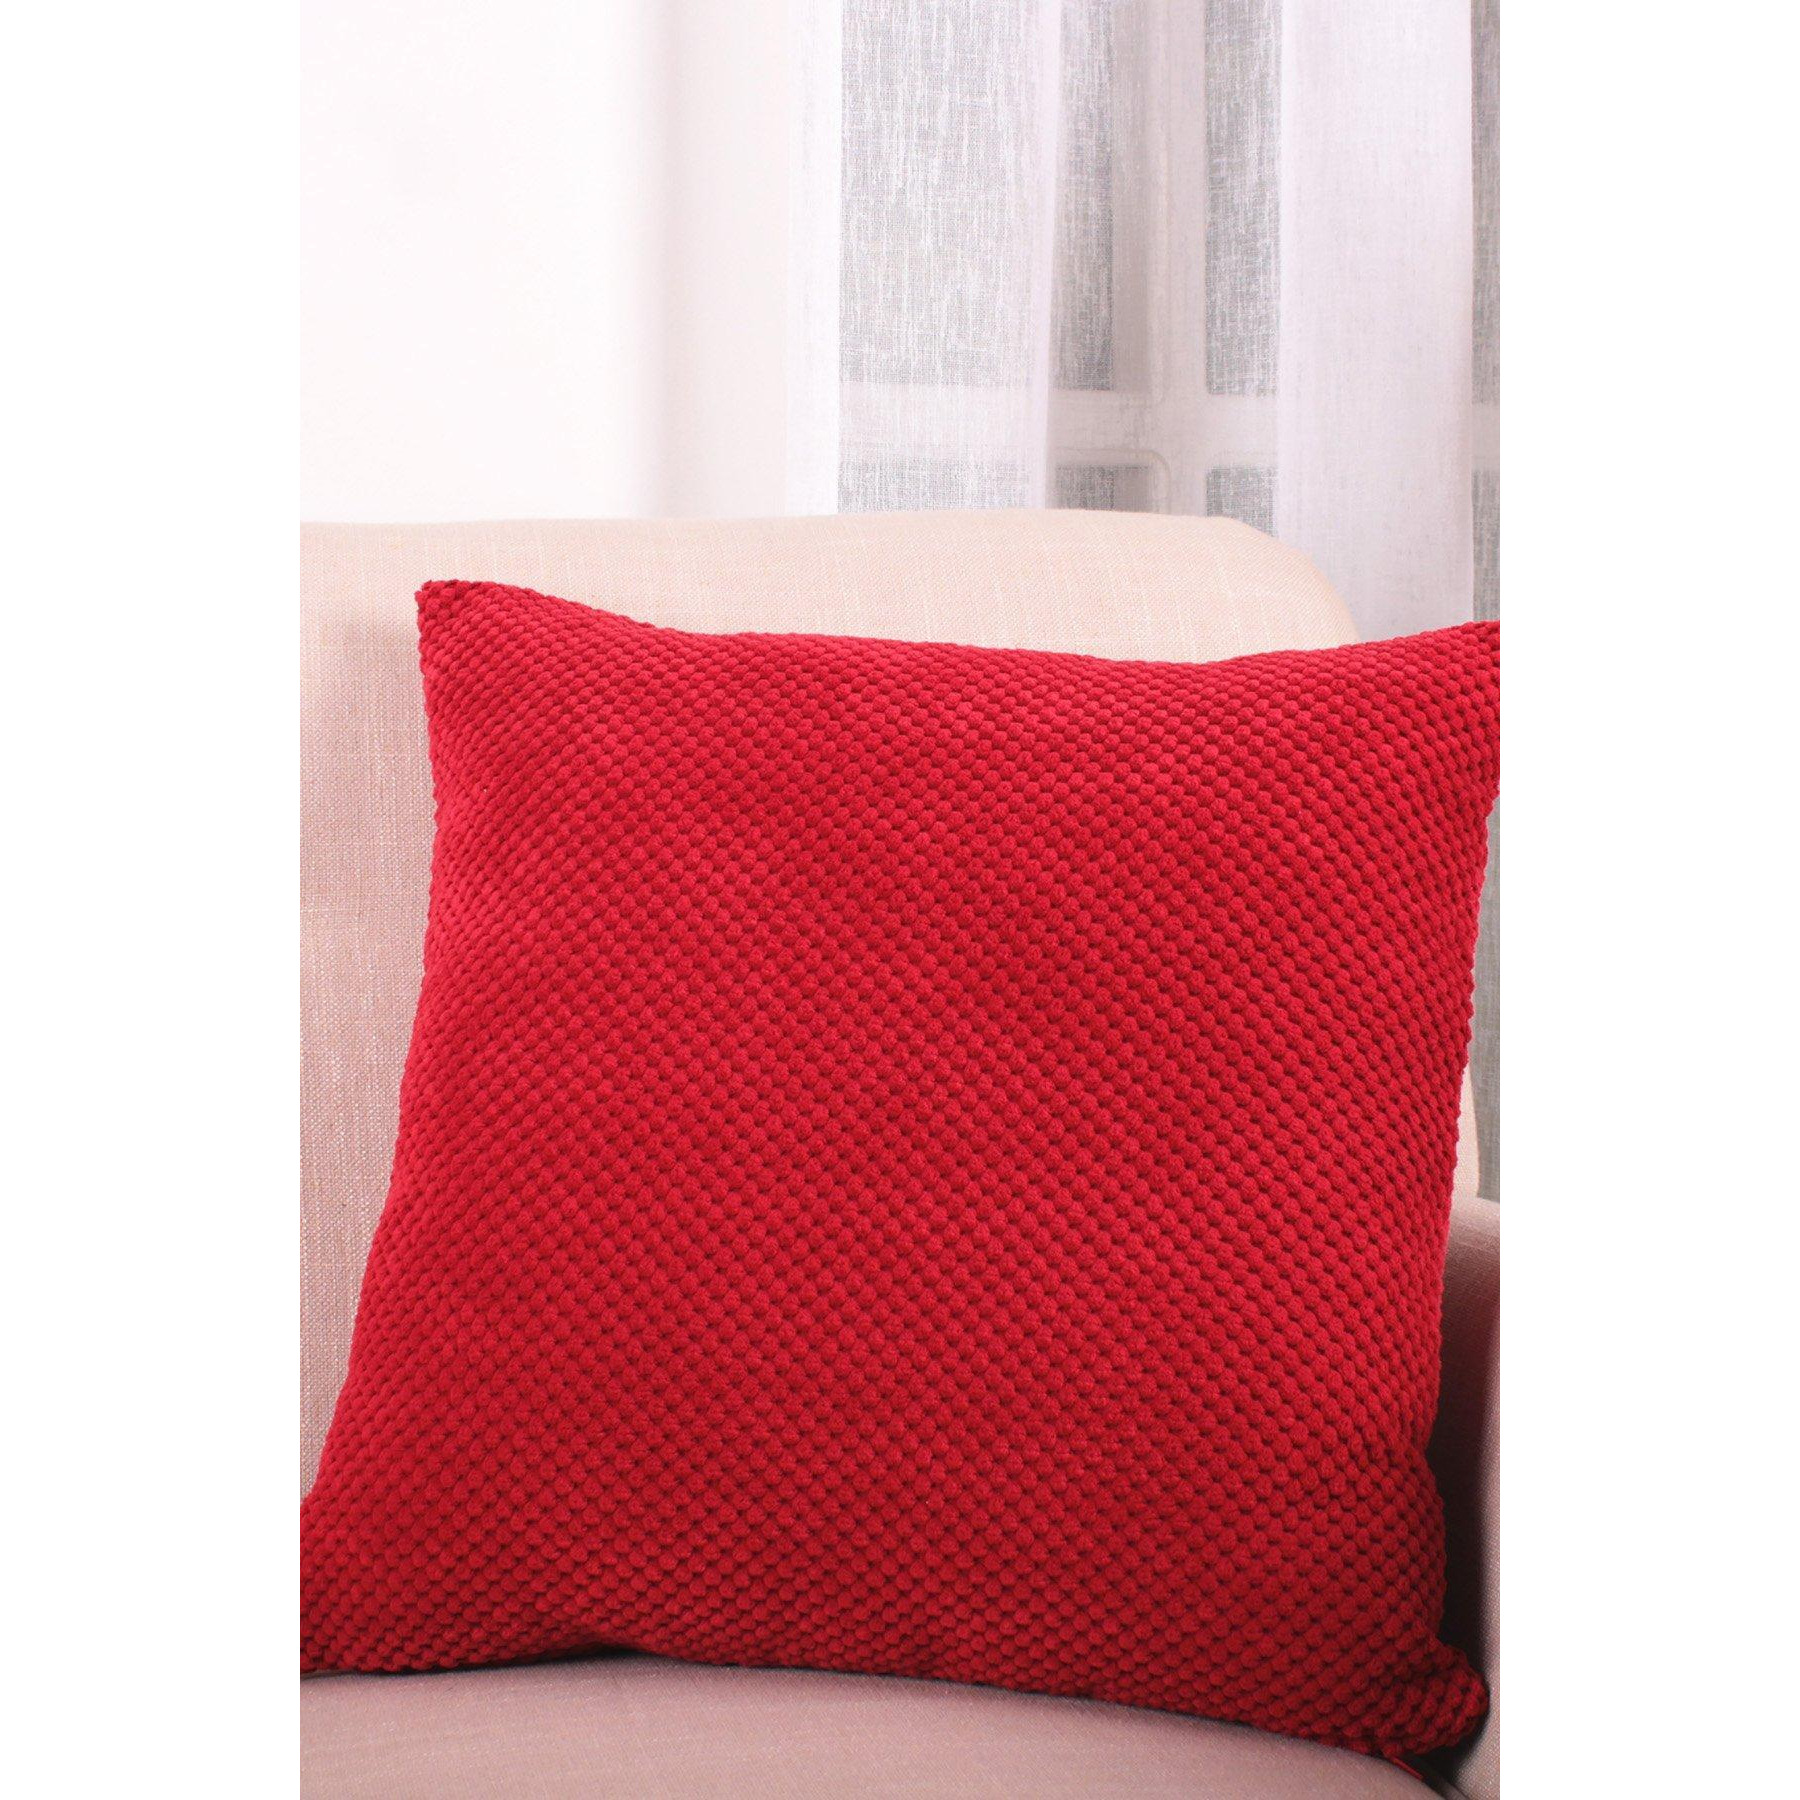 'Chenille Spot' Filled Cushion - image 1